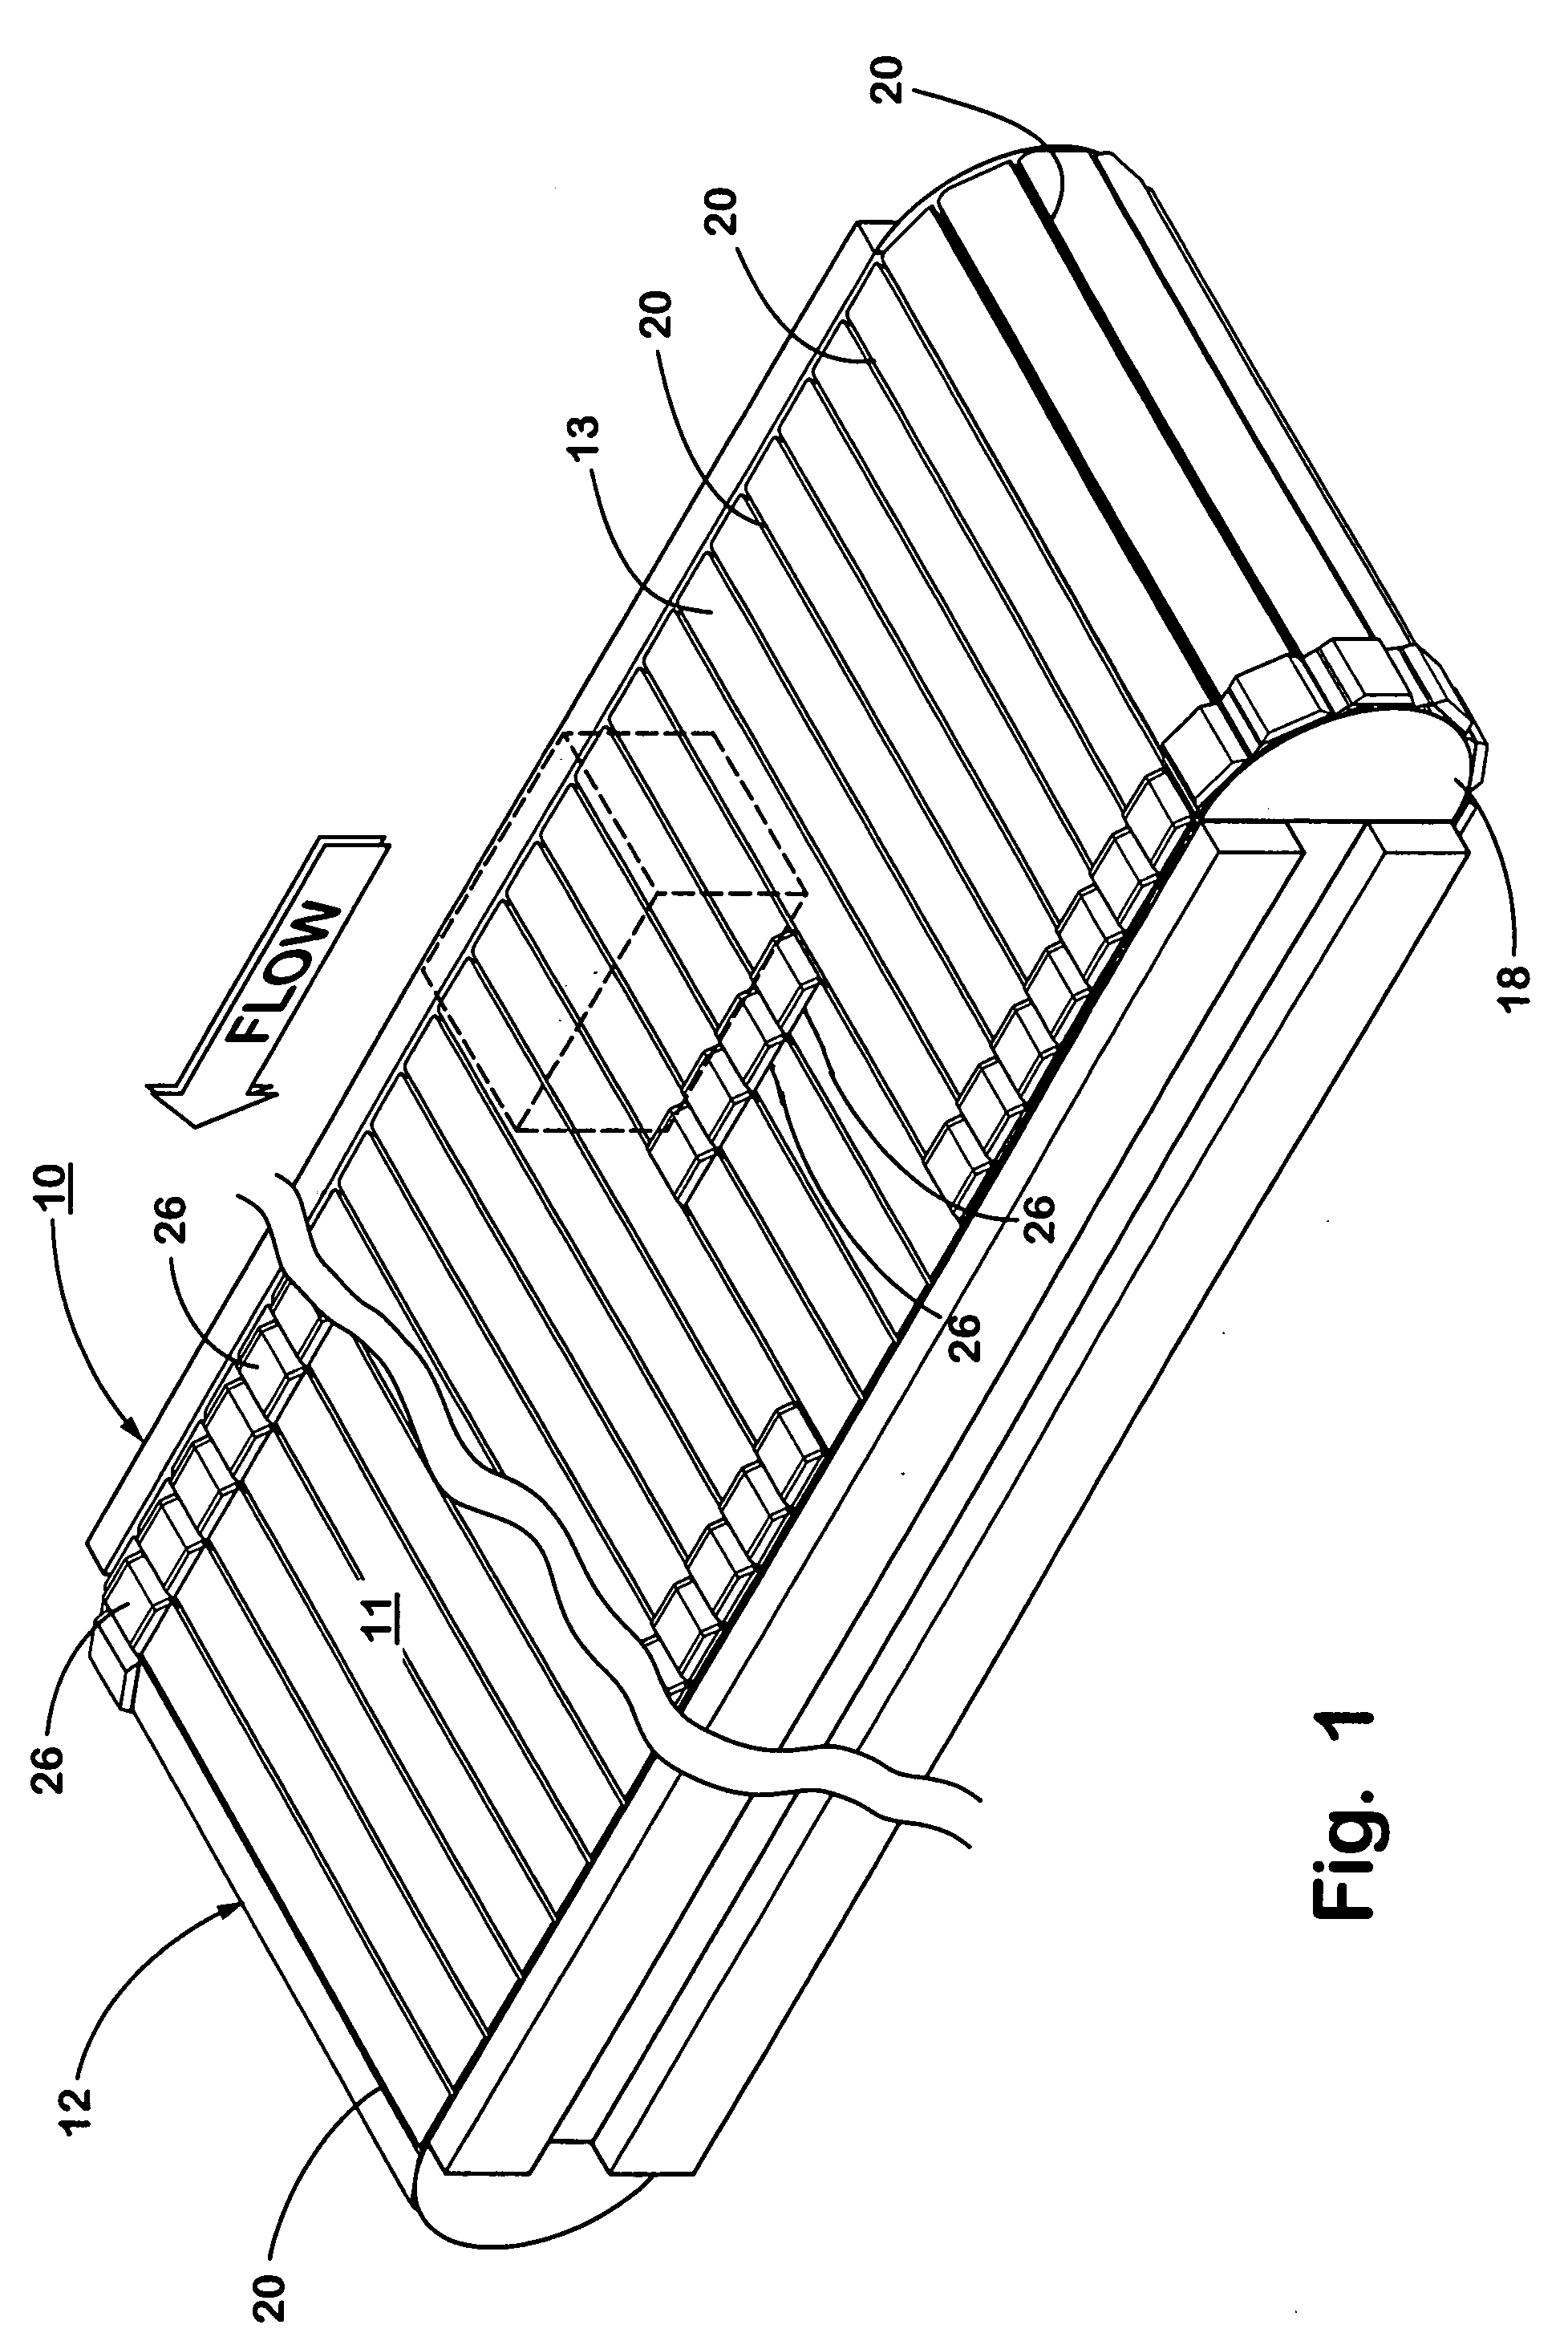 Positive displacement shoe and slat sorter apparatus and method